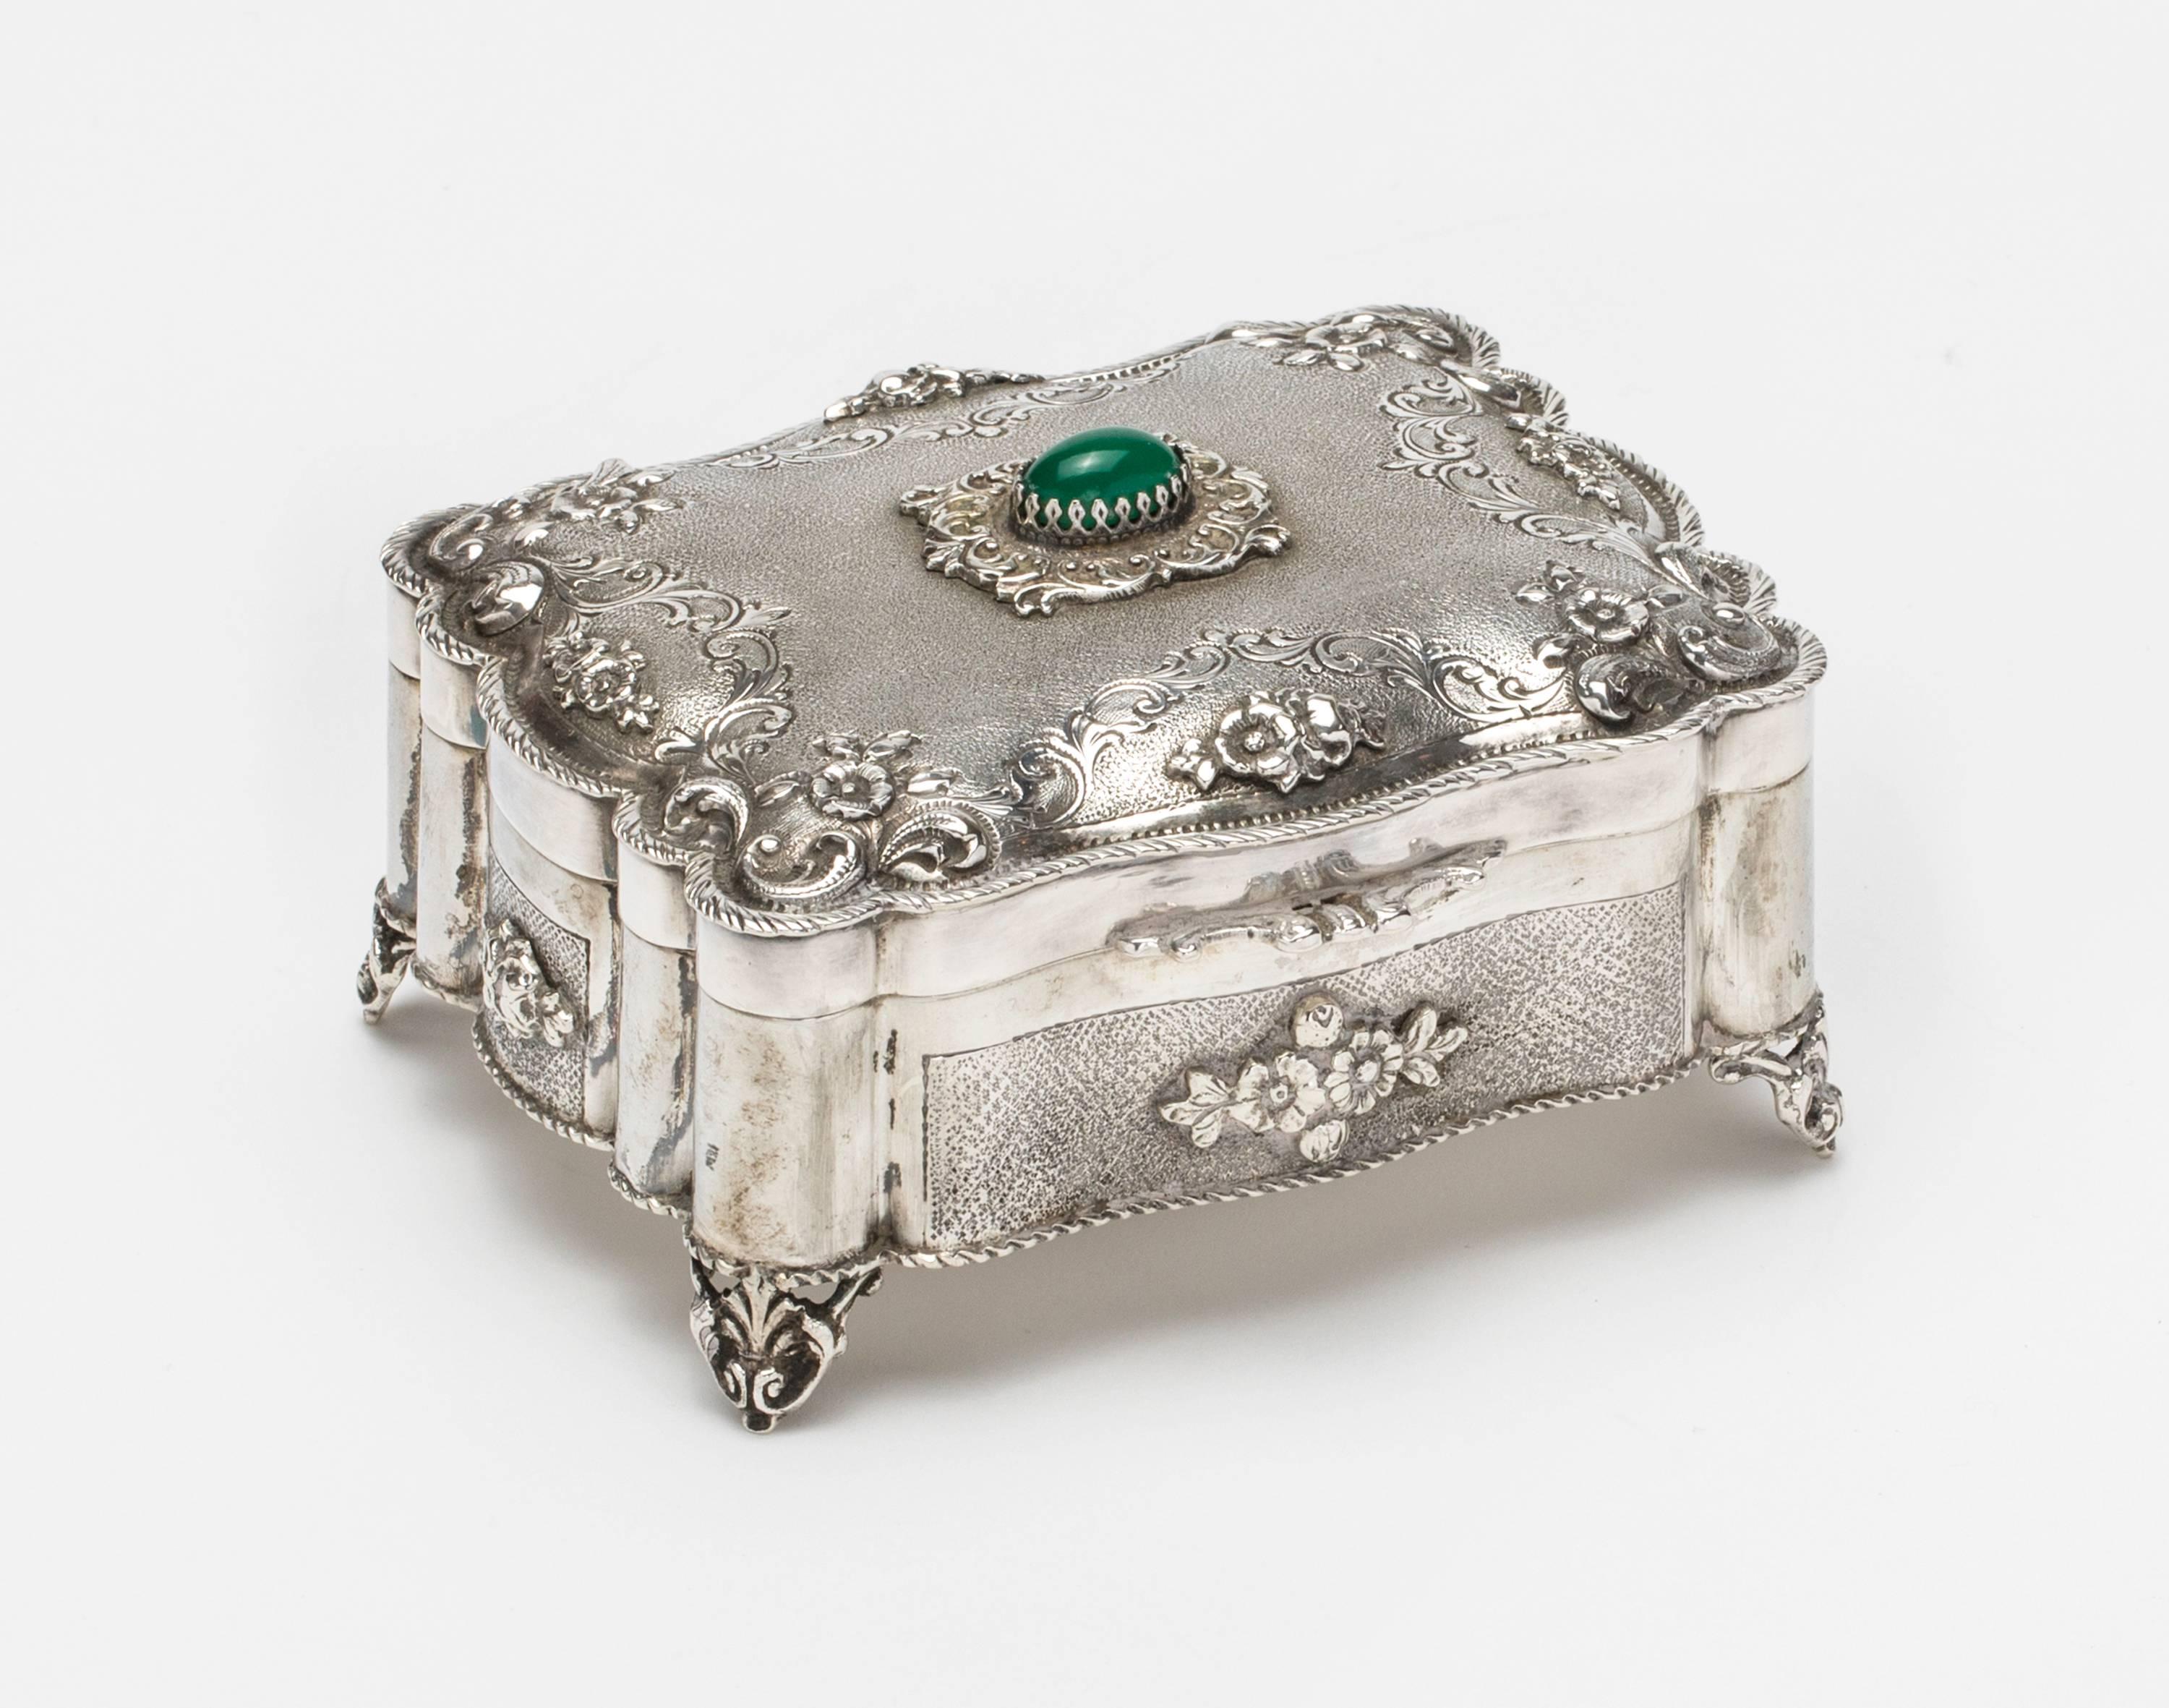 German 800 silver, circa 1900s. Beautifully made, scalloped shape sides. Etched and chased superbly, sits on small raised feet. Decoratively topped with beautiful green Jewel Chalcedony stone. With lid wide open, the box stands 5.5